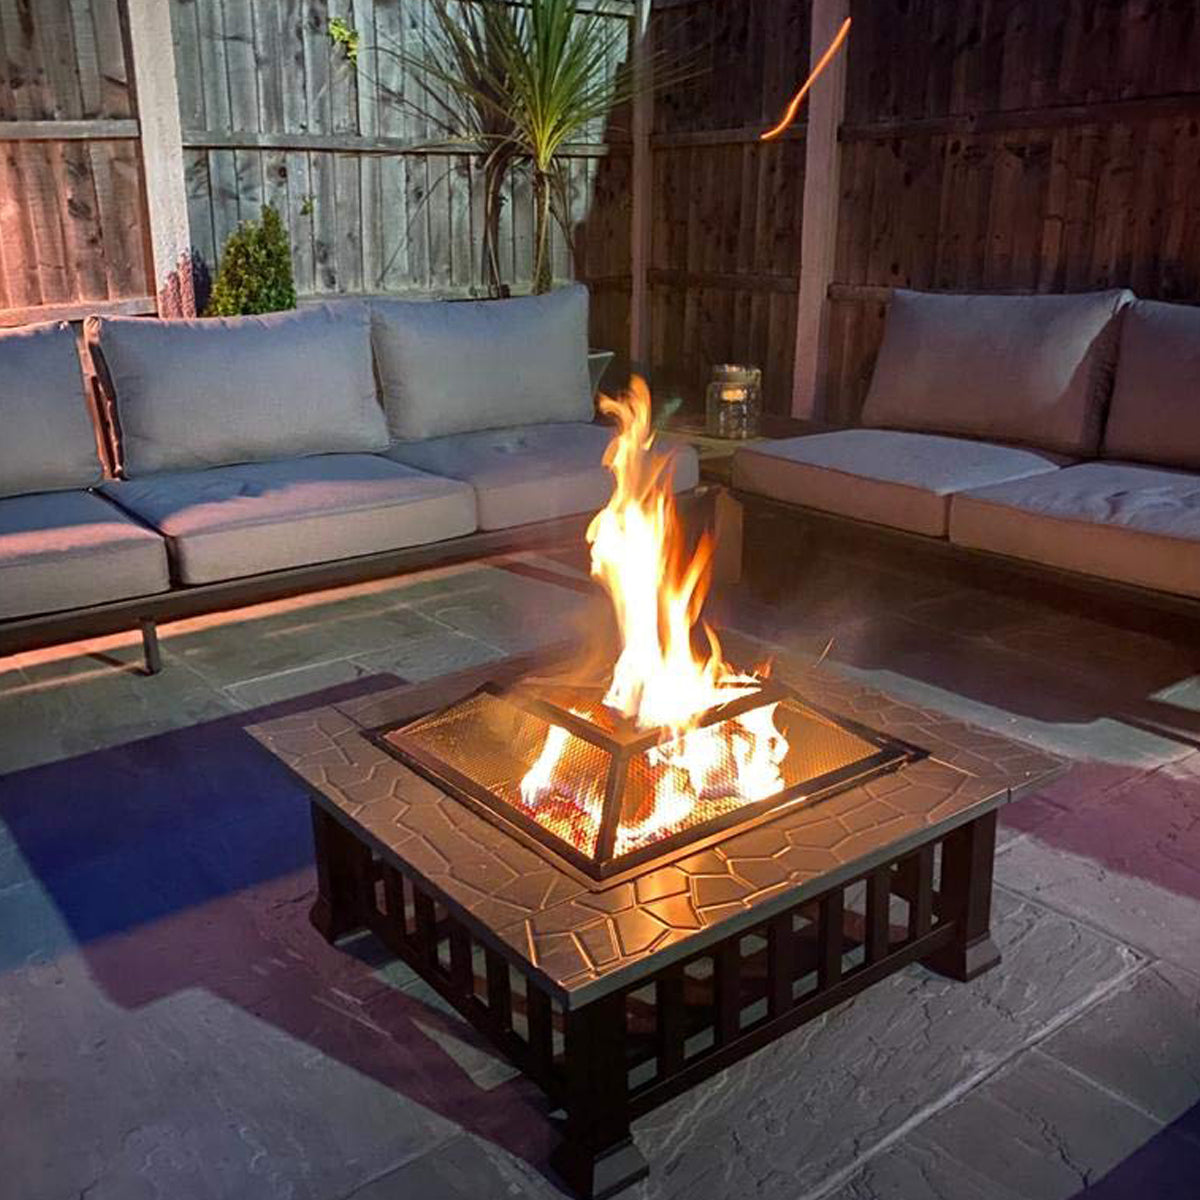 Our CYNTHIA Large Luxury Square Fire Pit / Patio Heater / BBQ / Ice Box is sure to provide warmth and comfort on cool evenings. This robust design ensures its suitability for any type of non flammable surface and is accompanied by a safety mesh lid, helping to prevent any burning embers from blowing away